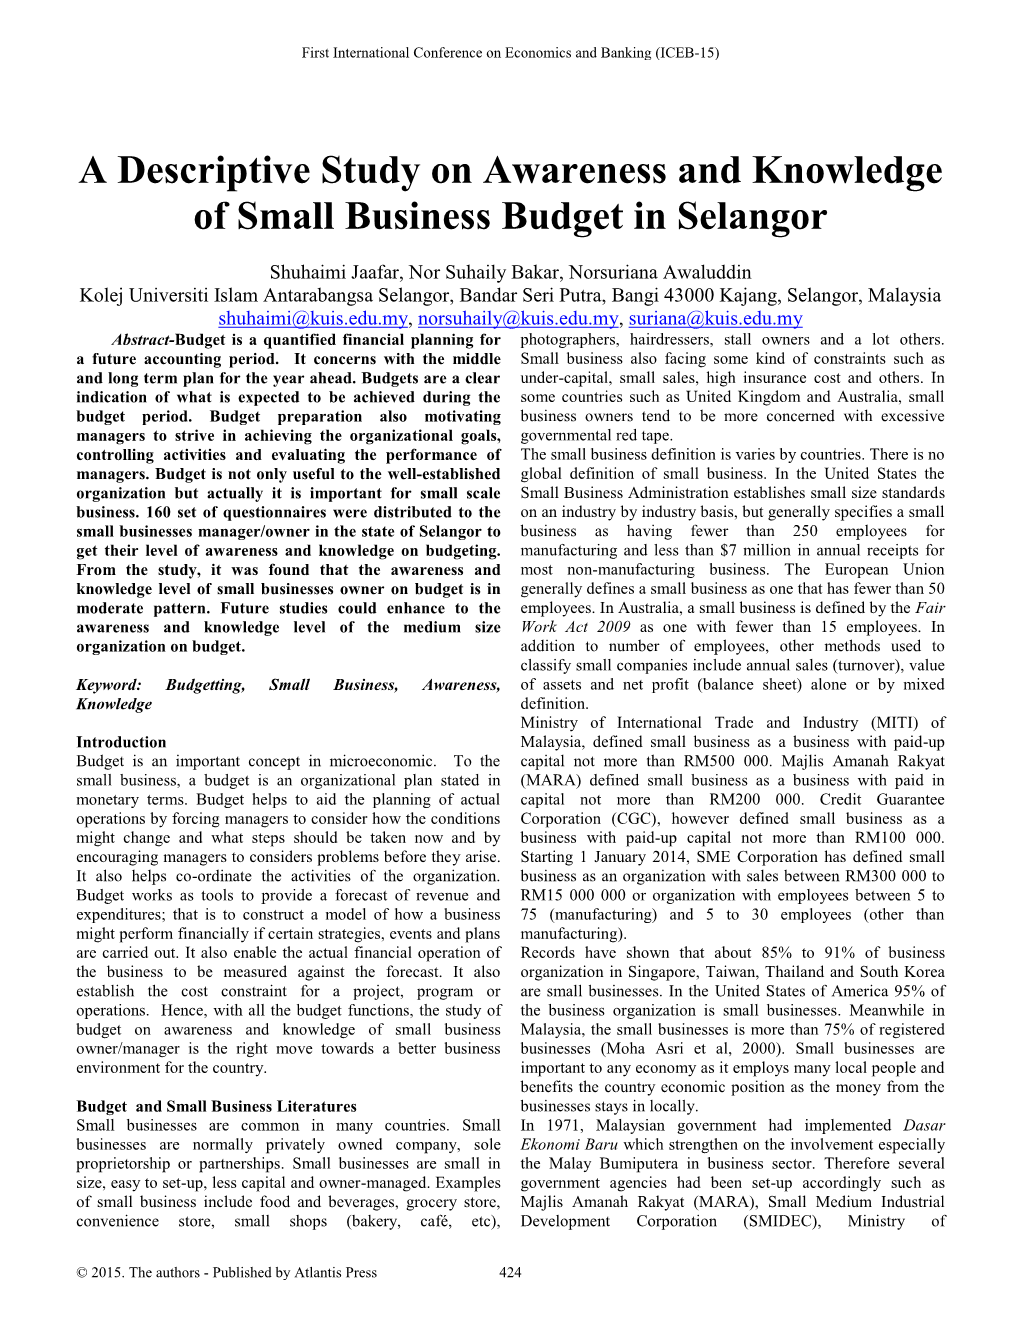 A Descriptive Study on Awareness and Knowledge of Small Business Budget in Selangor